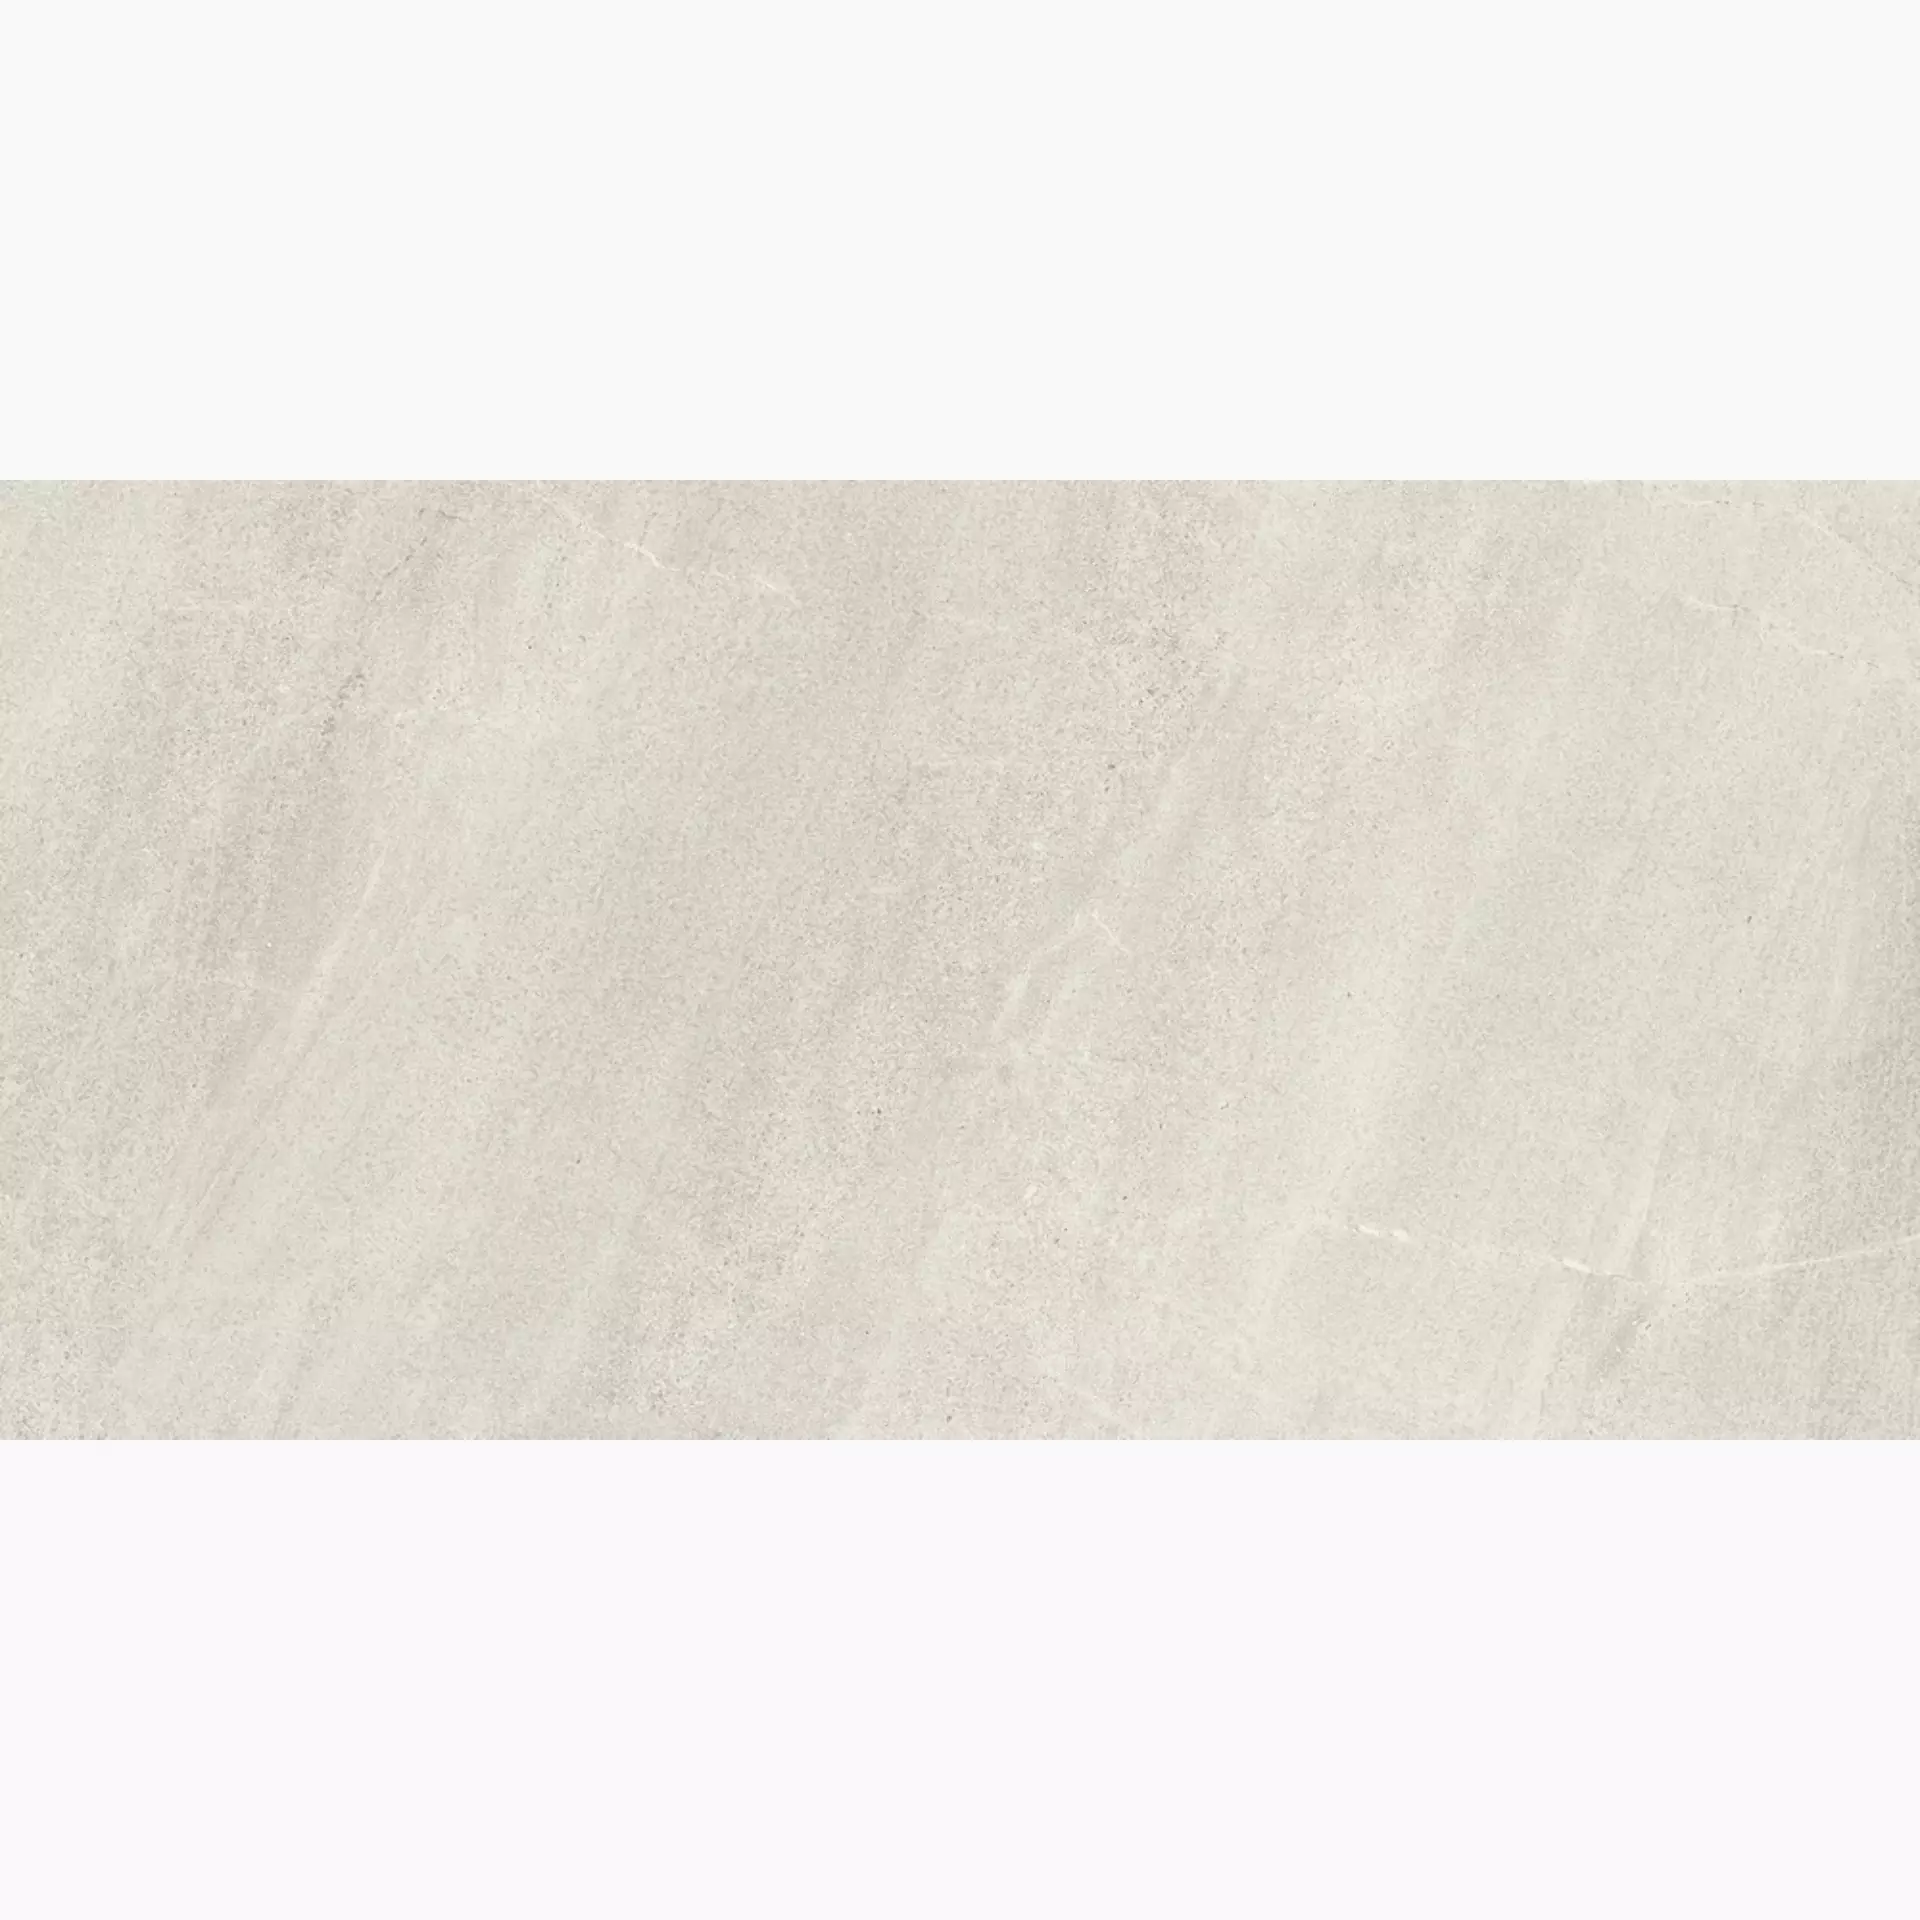 Cottodeste Limestone Clay Blazed Protect EG-LS15 30x60cm rectified 14mm